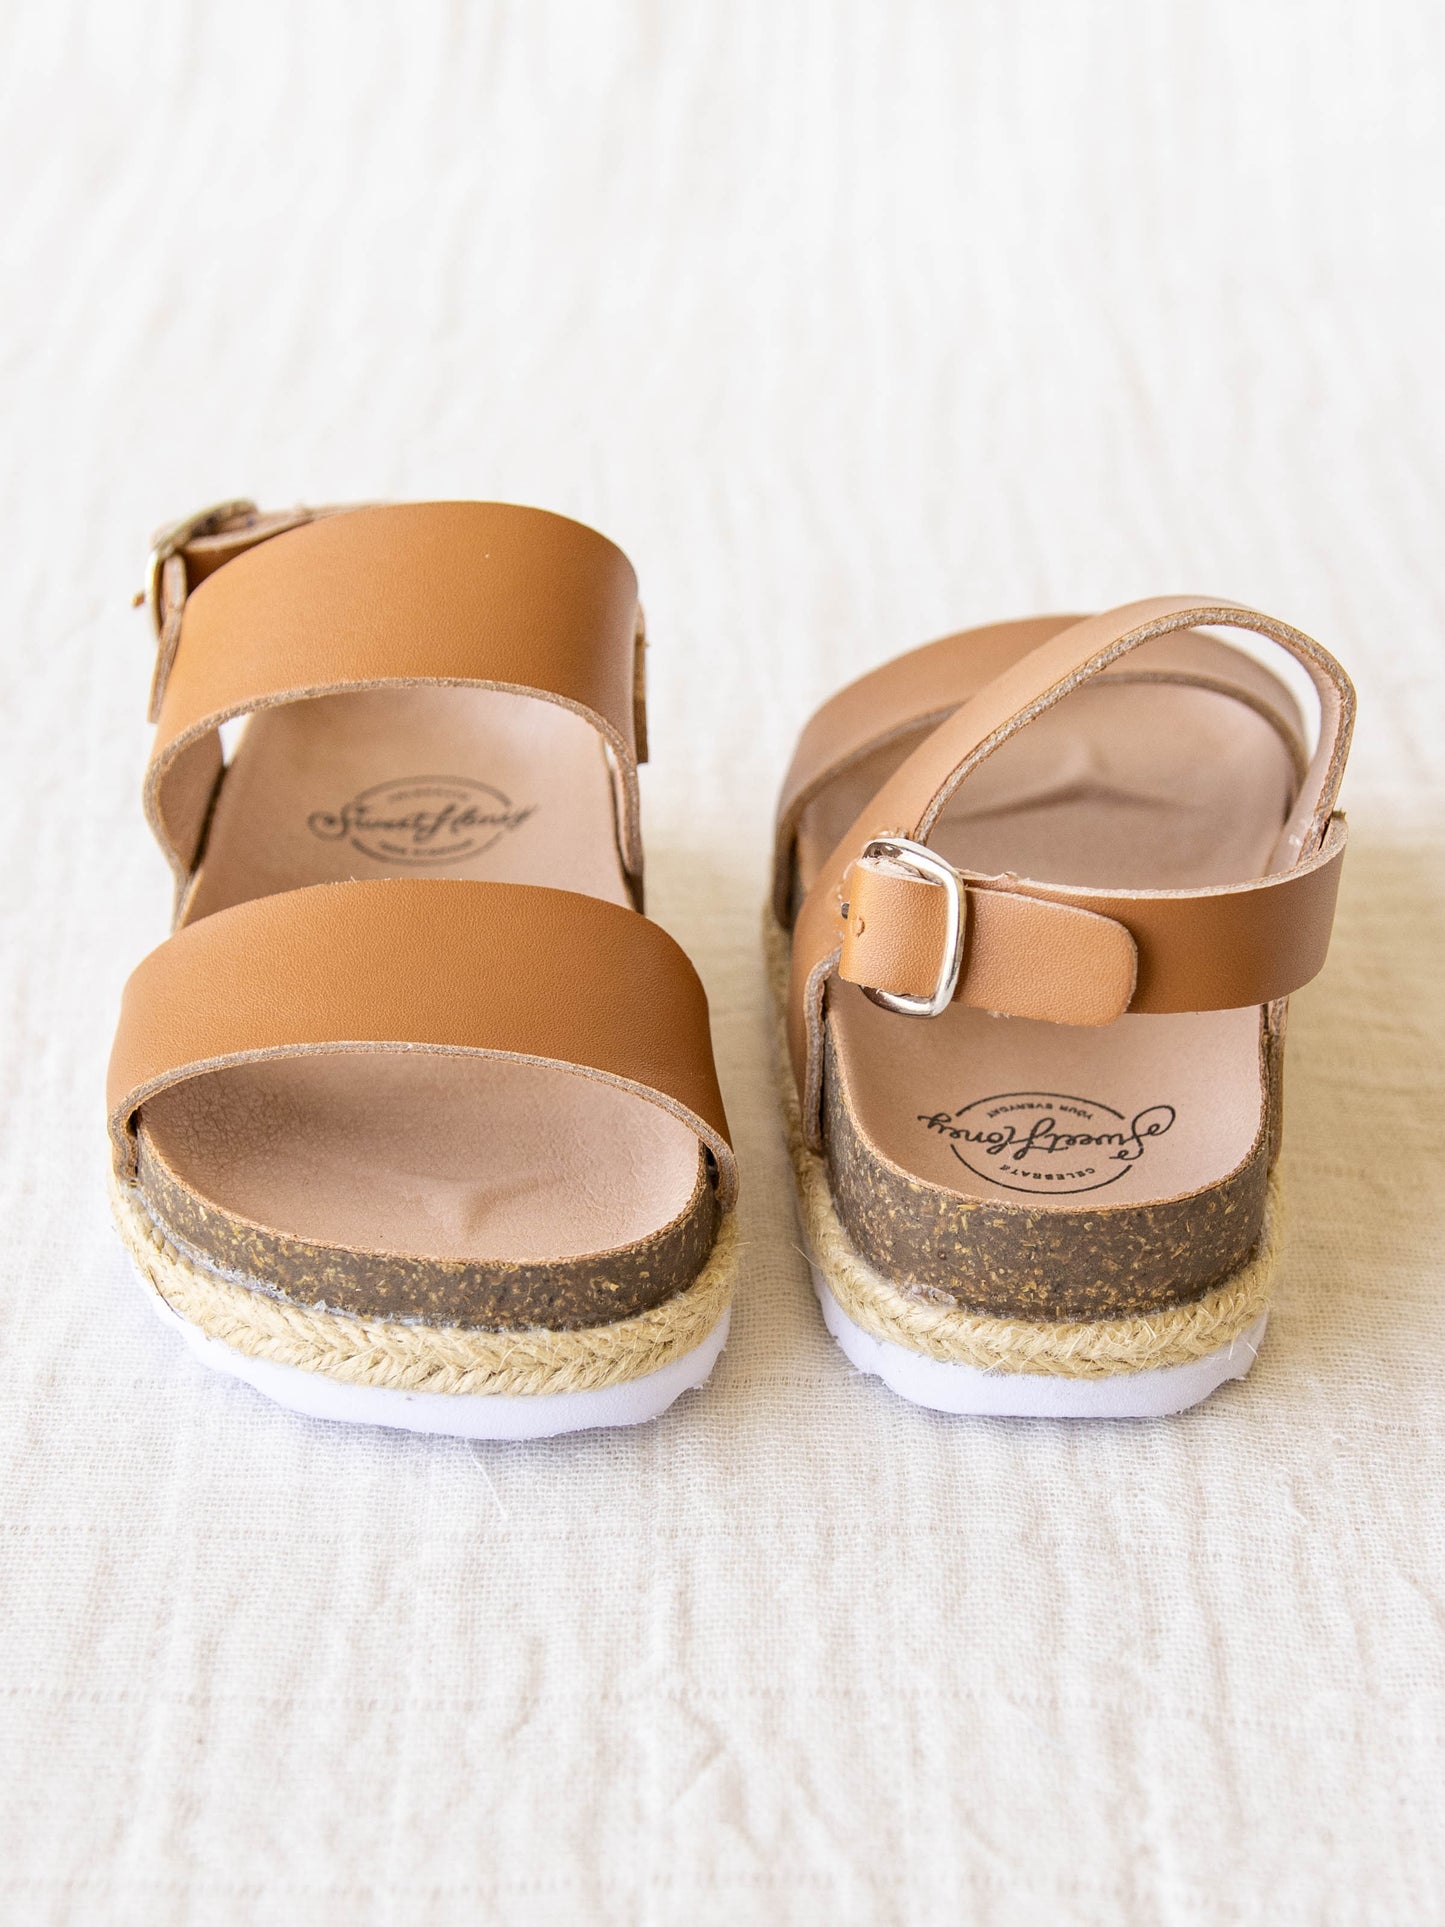 These Strappy Cork Sandals are made of wide strips of Brown manmade leather, cork sole, and have a metal adjustable buckle.